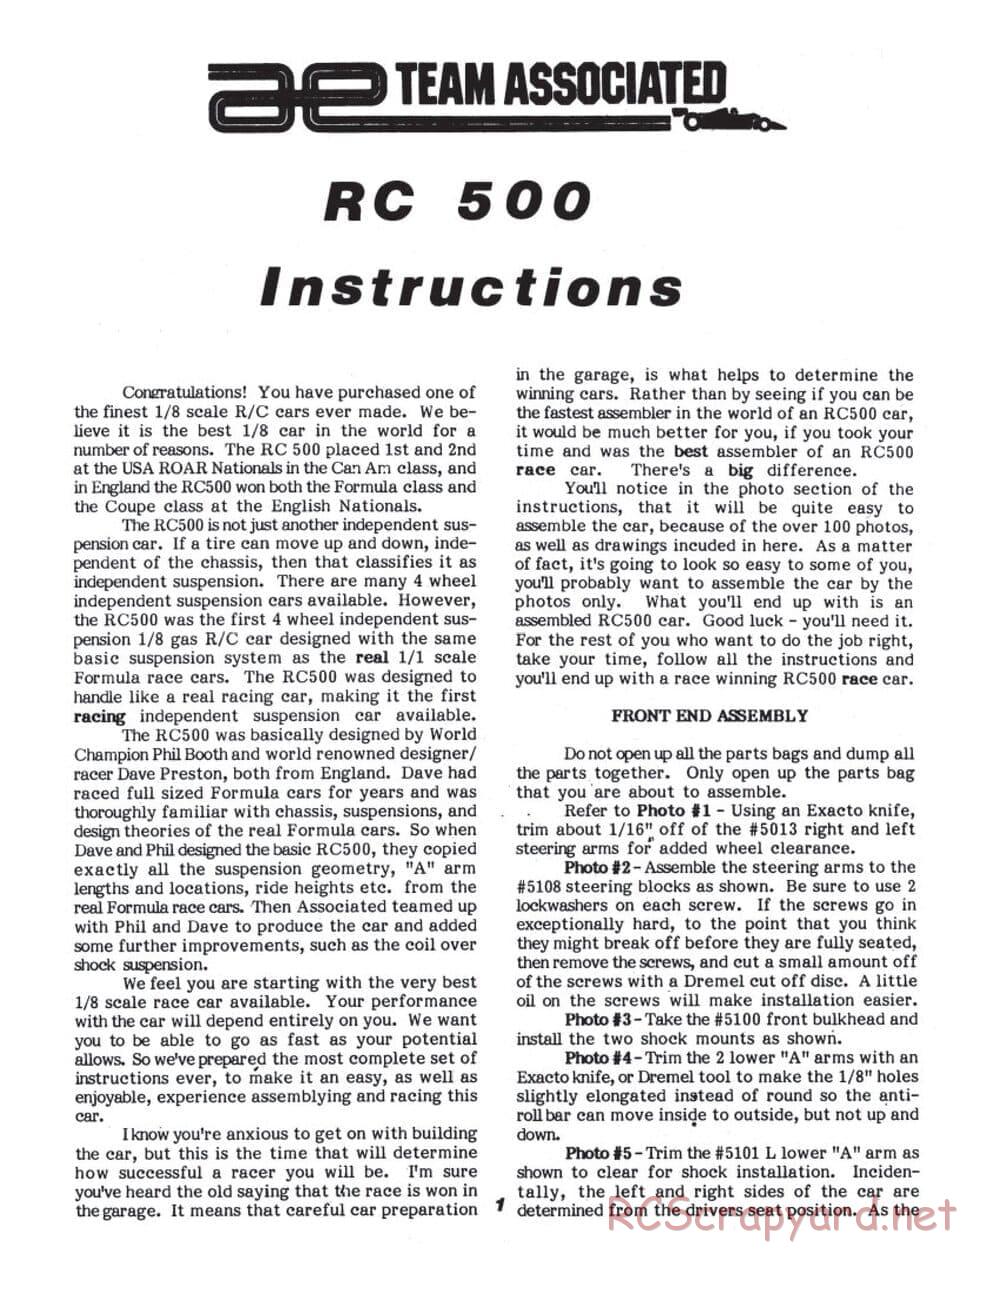 Team Associated - RC500 2WD - Text Manual - Page 1